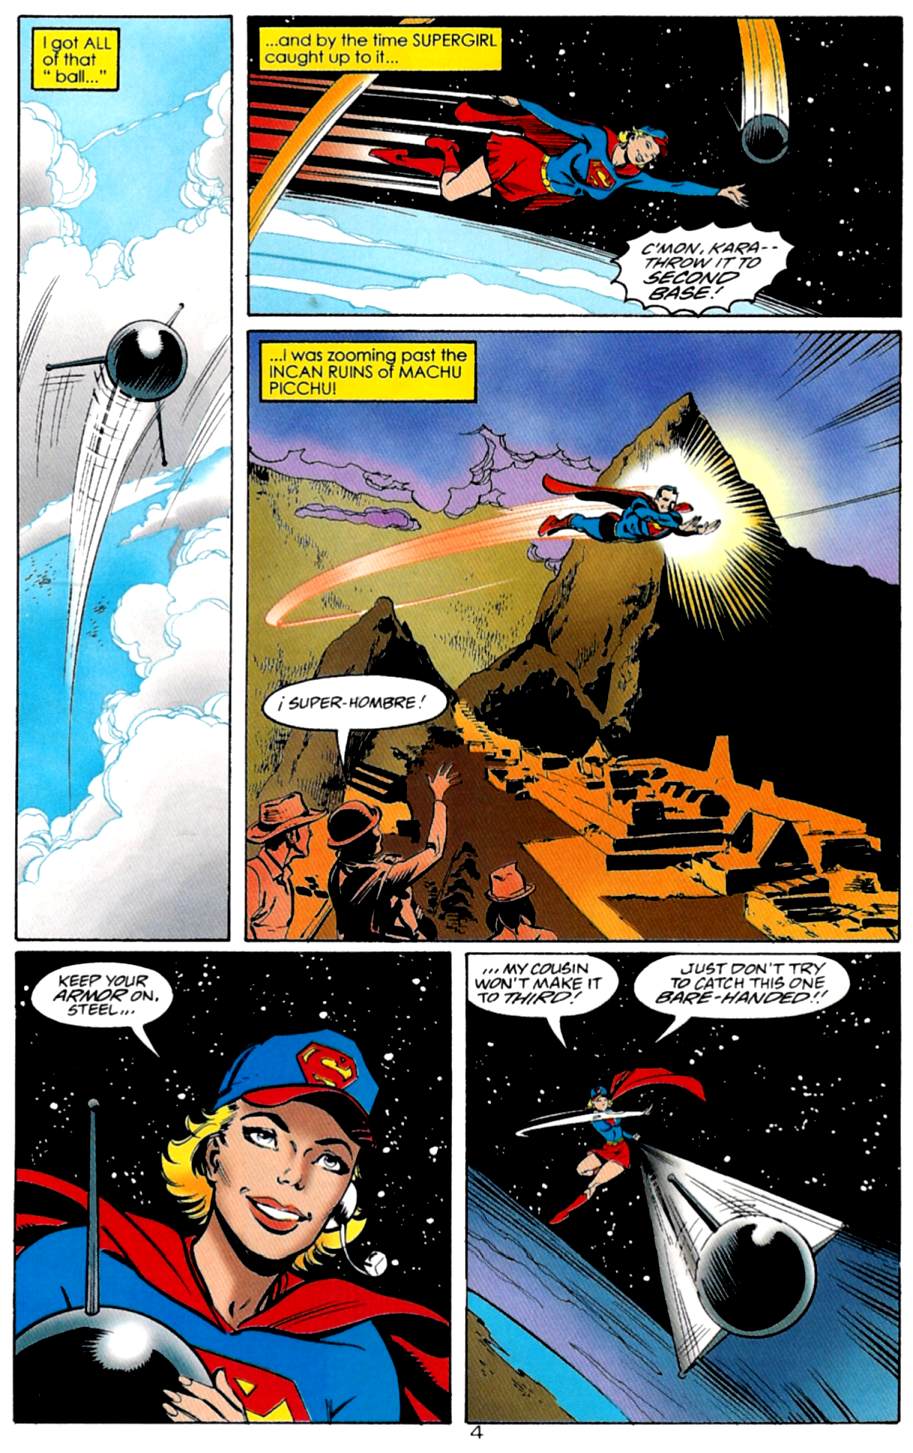 Adventures of Superman (1987) 558 Page 4